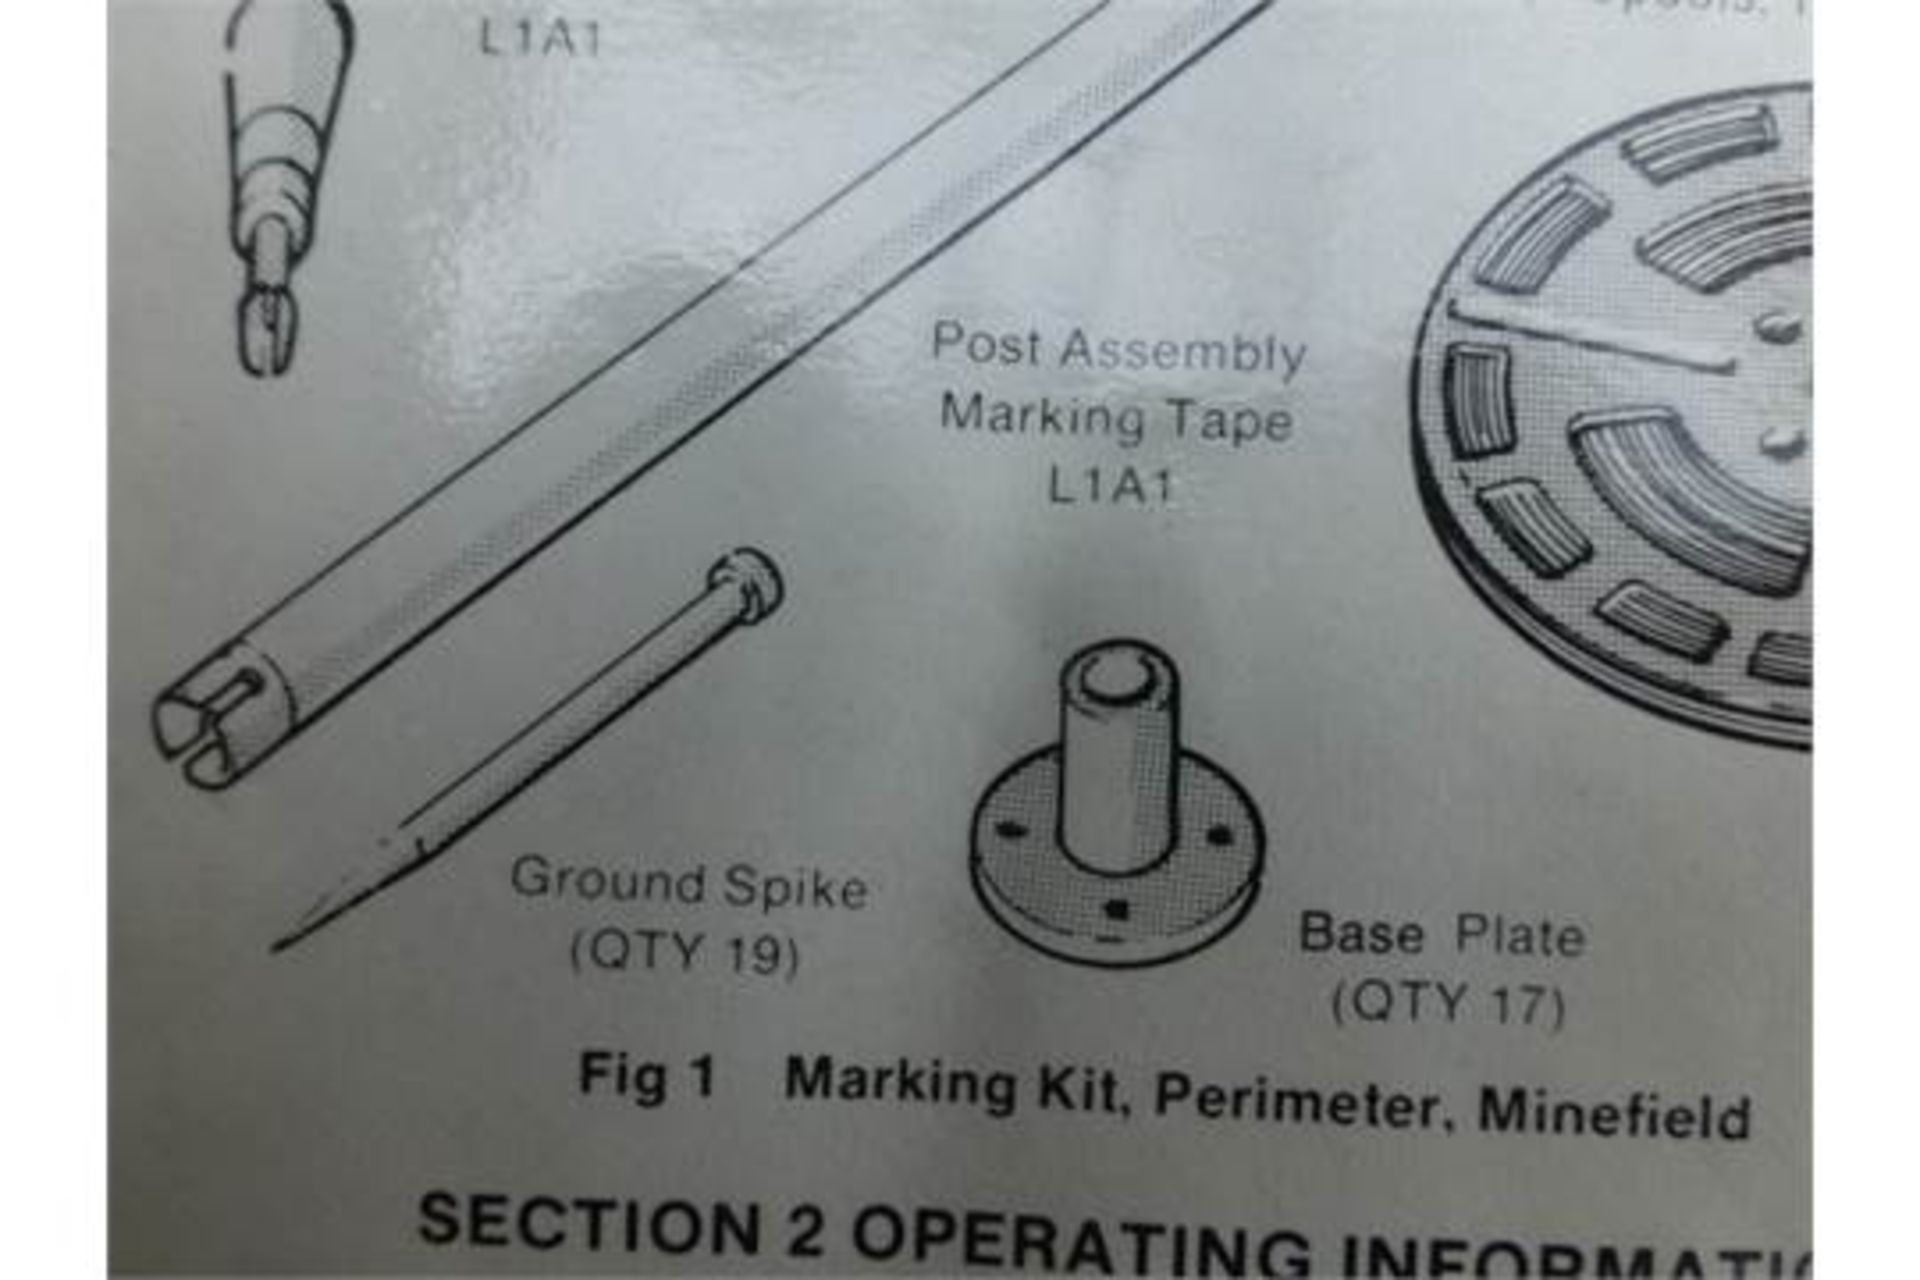 Perimeter Marking Kit complete with 2 x 125m Tape Spools, Posts, Ground Spikes, Base Plates etc - Image 7 of 9